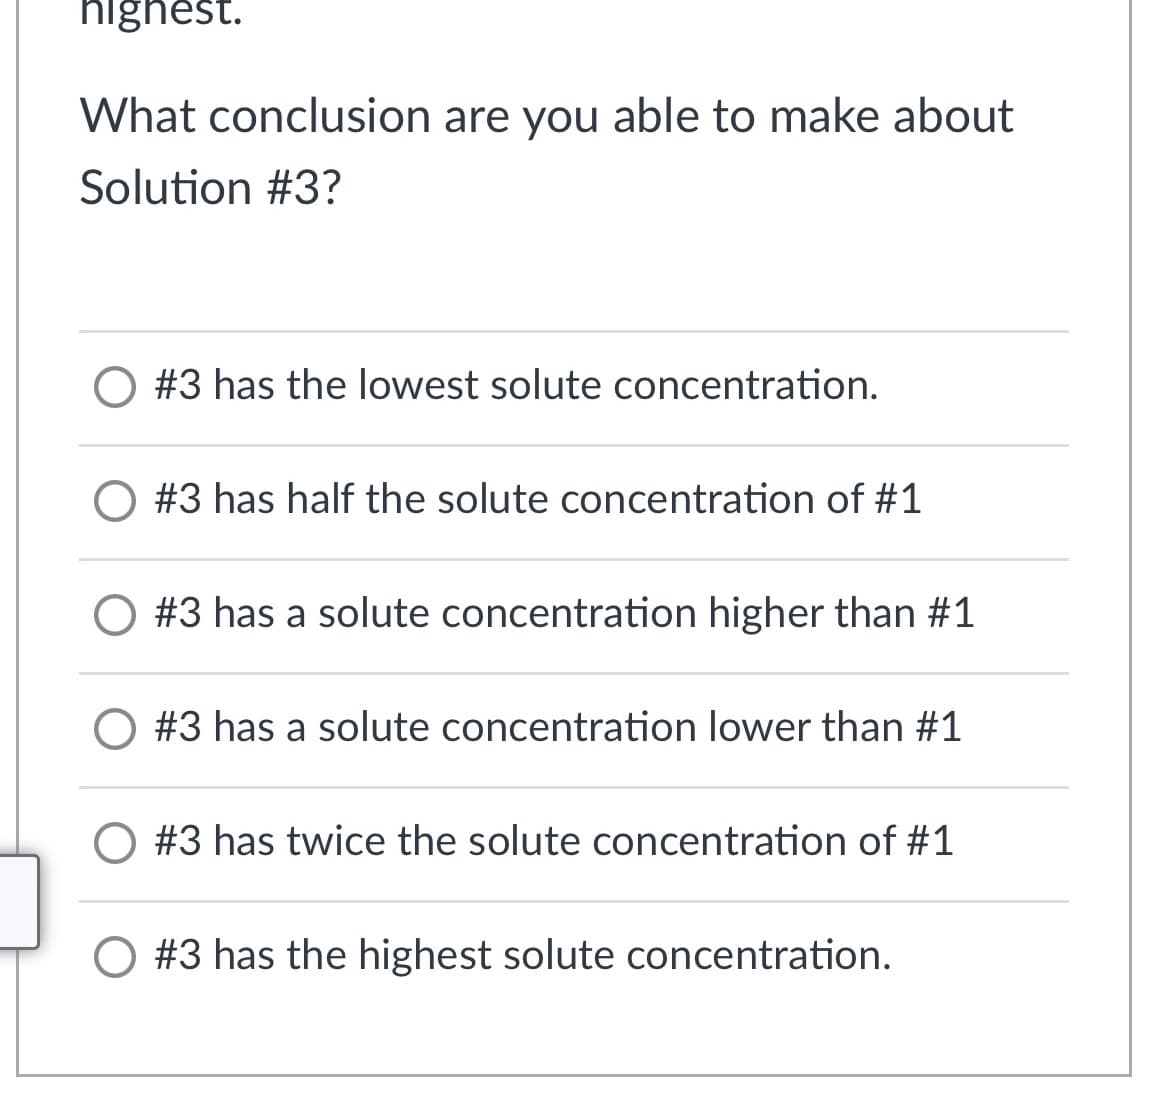 hignest.
What conclusion are you able to make about
Solution #3?
O #3 has the lowest solute concentration.
#3 has half the solute concentration of #1
#3 has a solute concentration higher than #1
#3 has a solute concentration lower than #1
O #3 has twice the solute concentration of #1
O #3 has the highest solute concentration.
